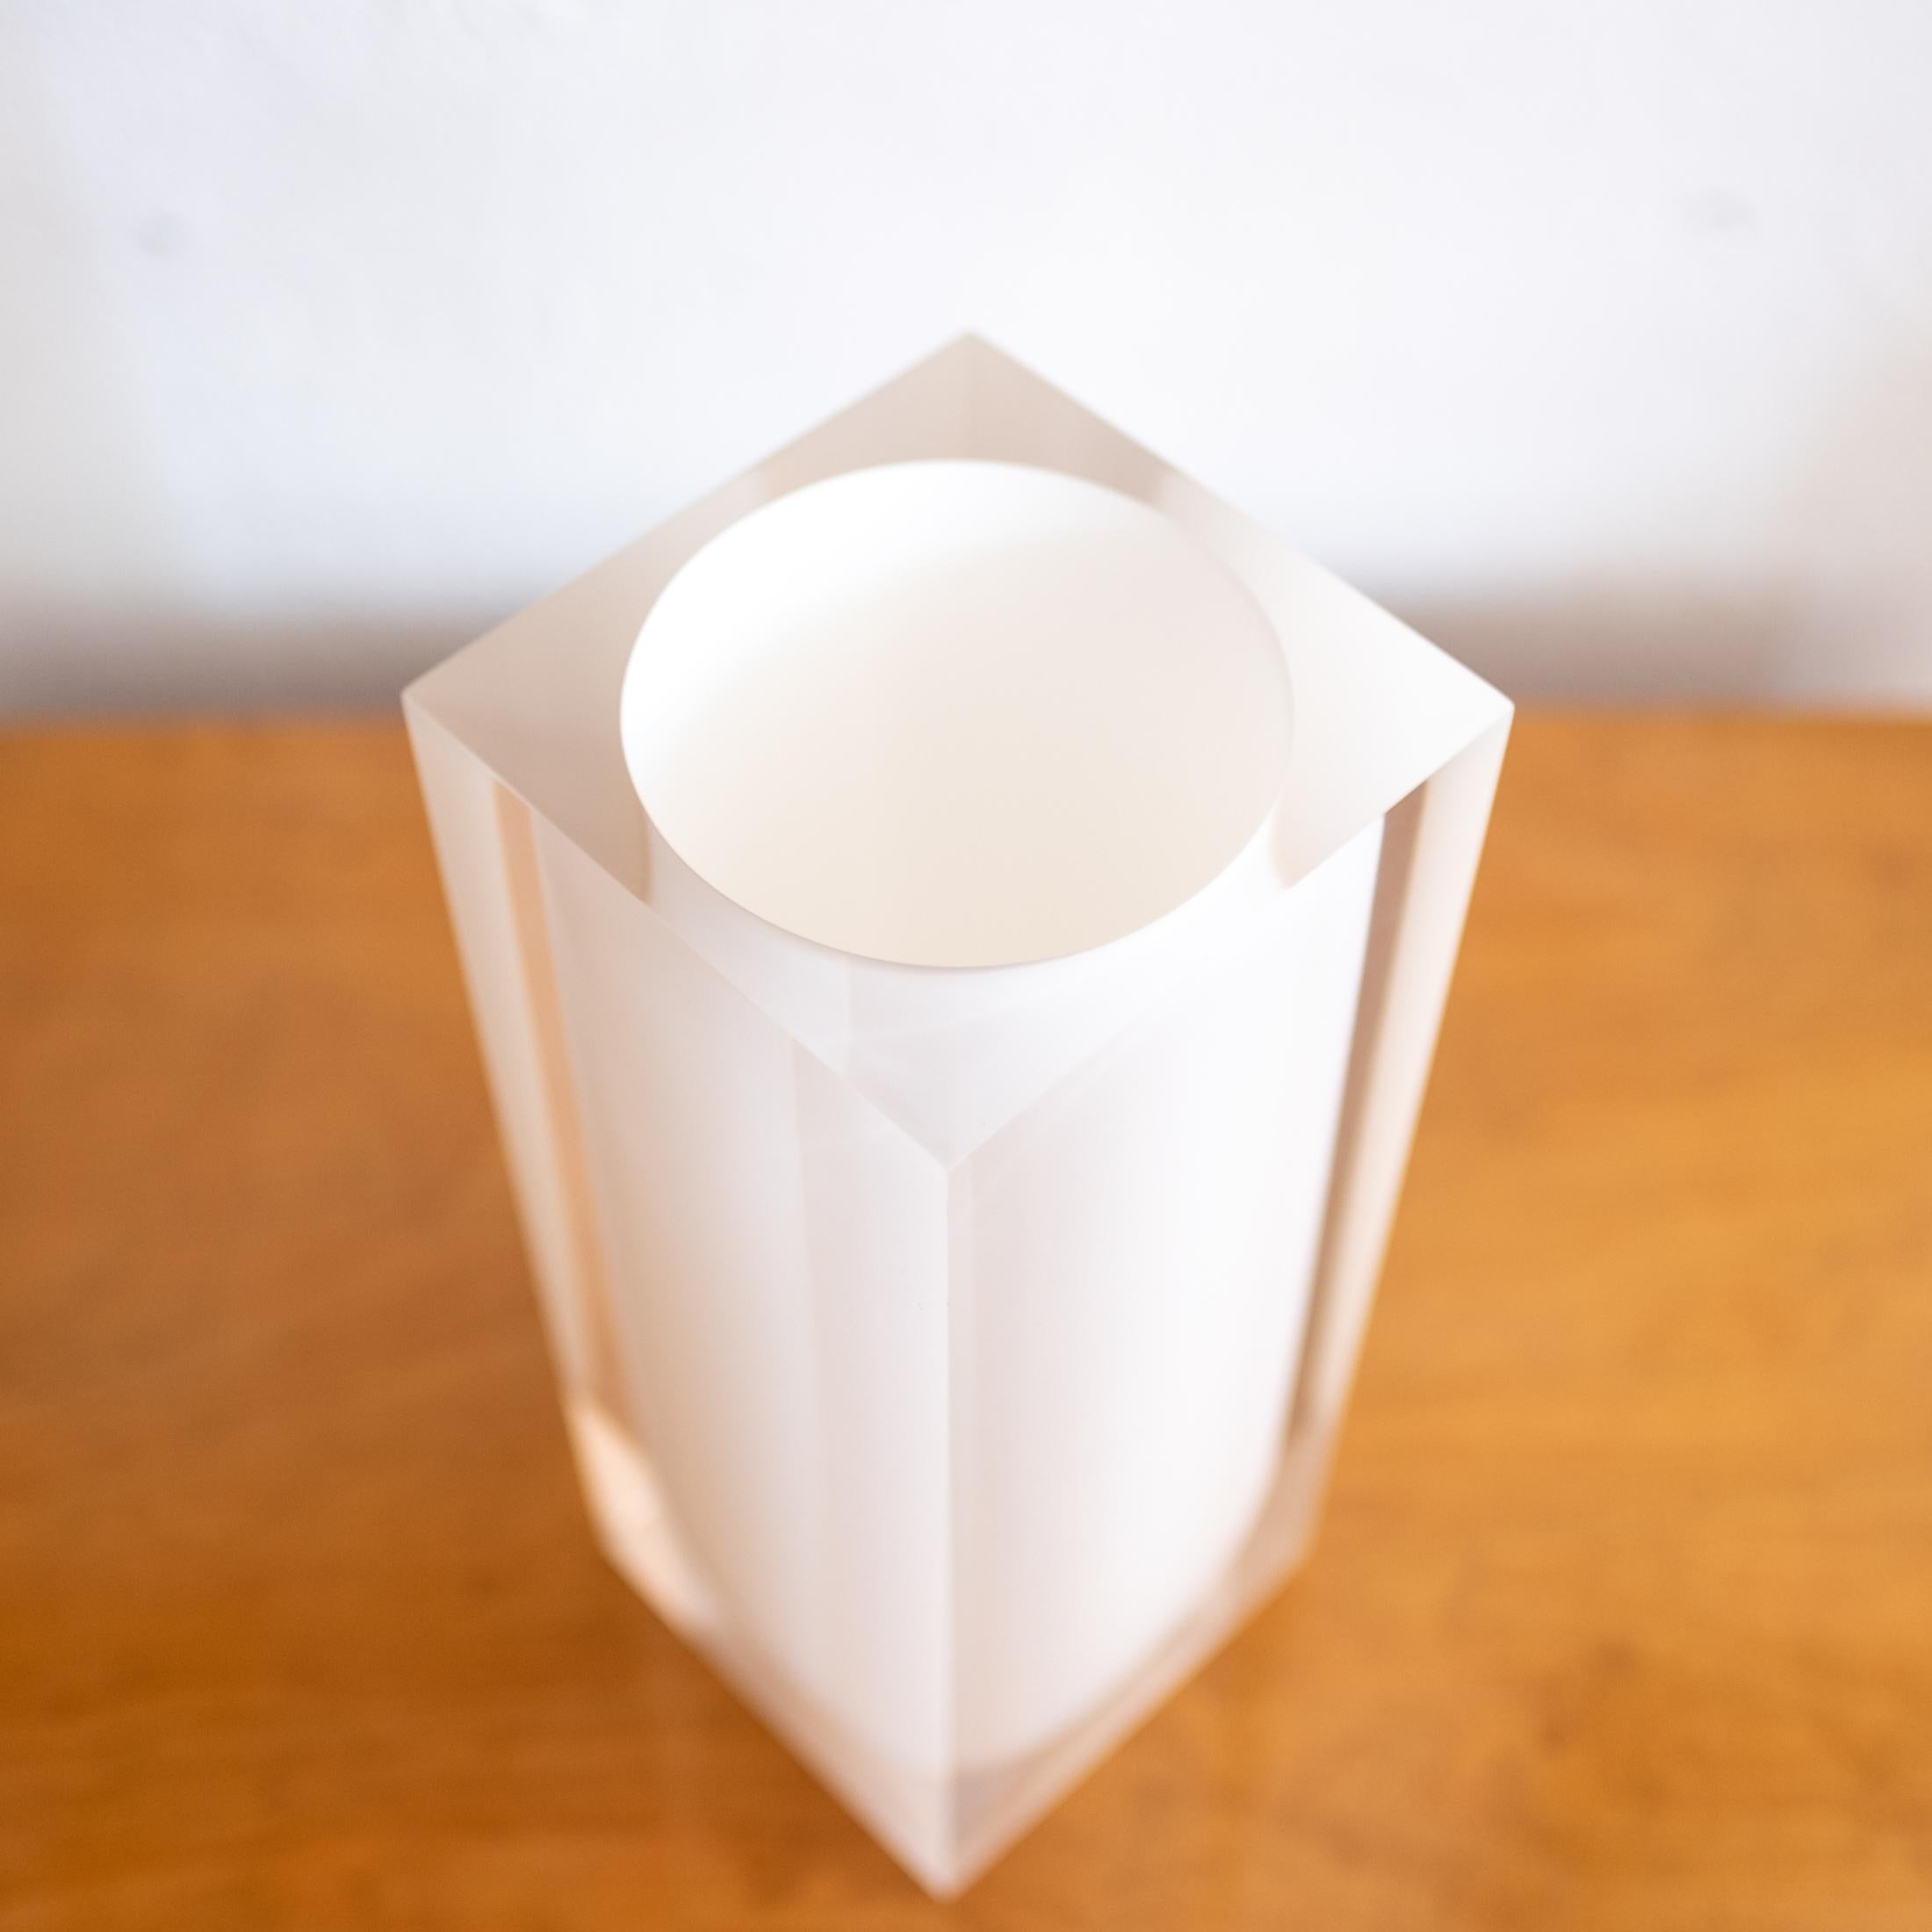 Minimalist Lucite Vase Sculpture 1970s In Good Condition For Sale In San Diego, CA